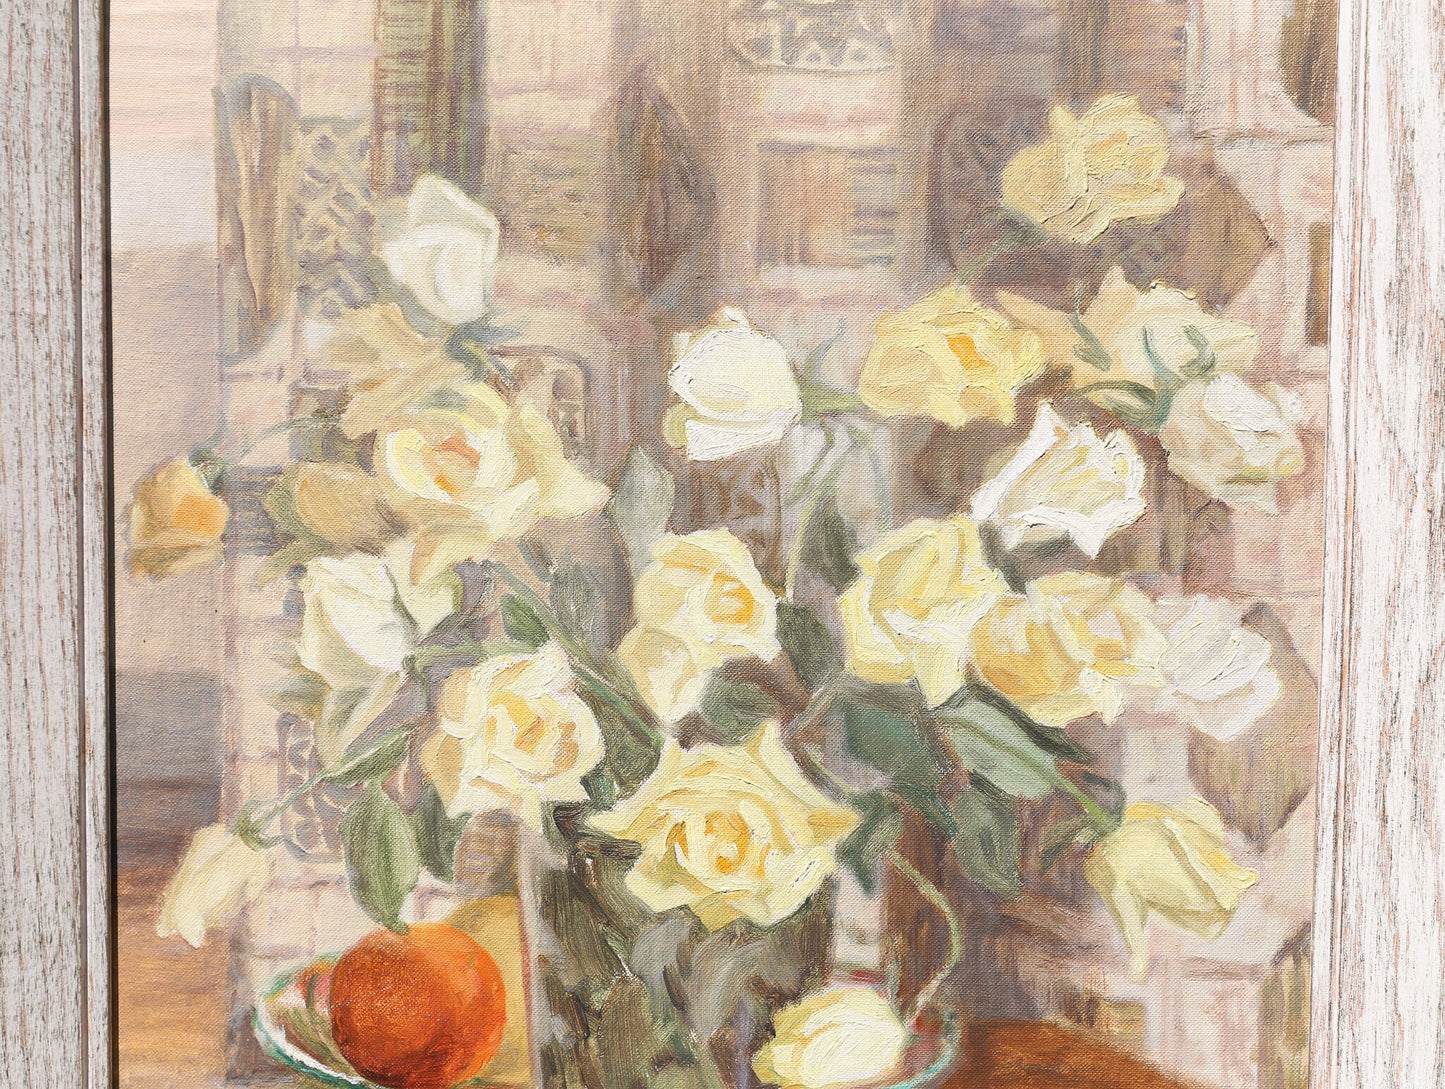 Painting Oil on Canvasboard "Pale Roses" Artist Signed Jule Melbardis 1950s Yellow Roses Modernist MCM Mid Century Modern Realist